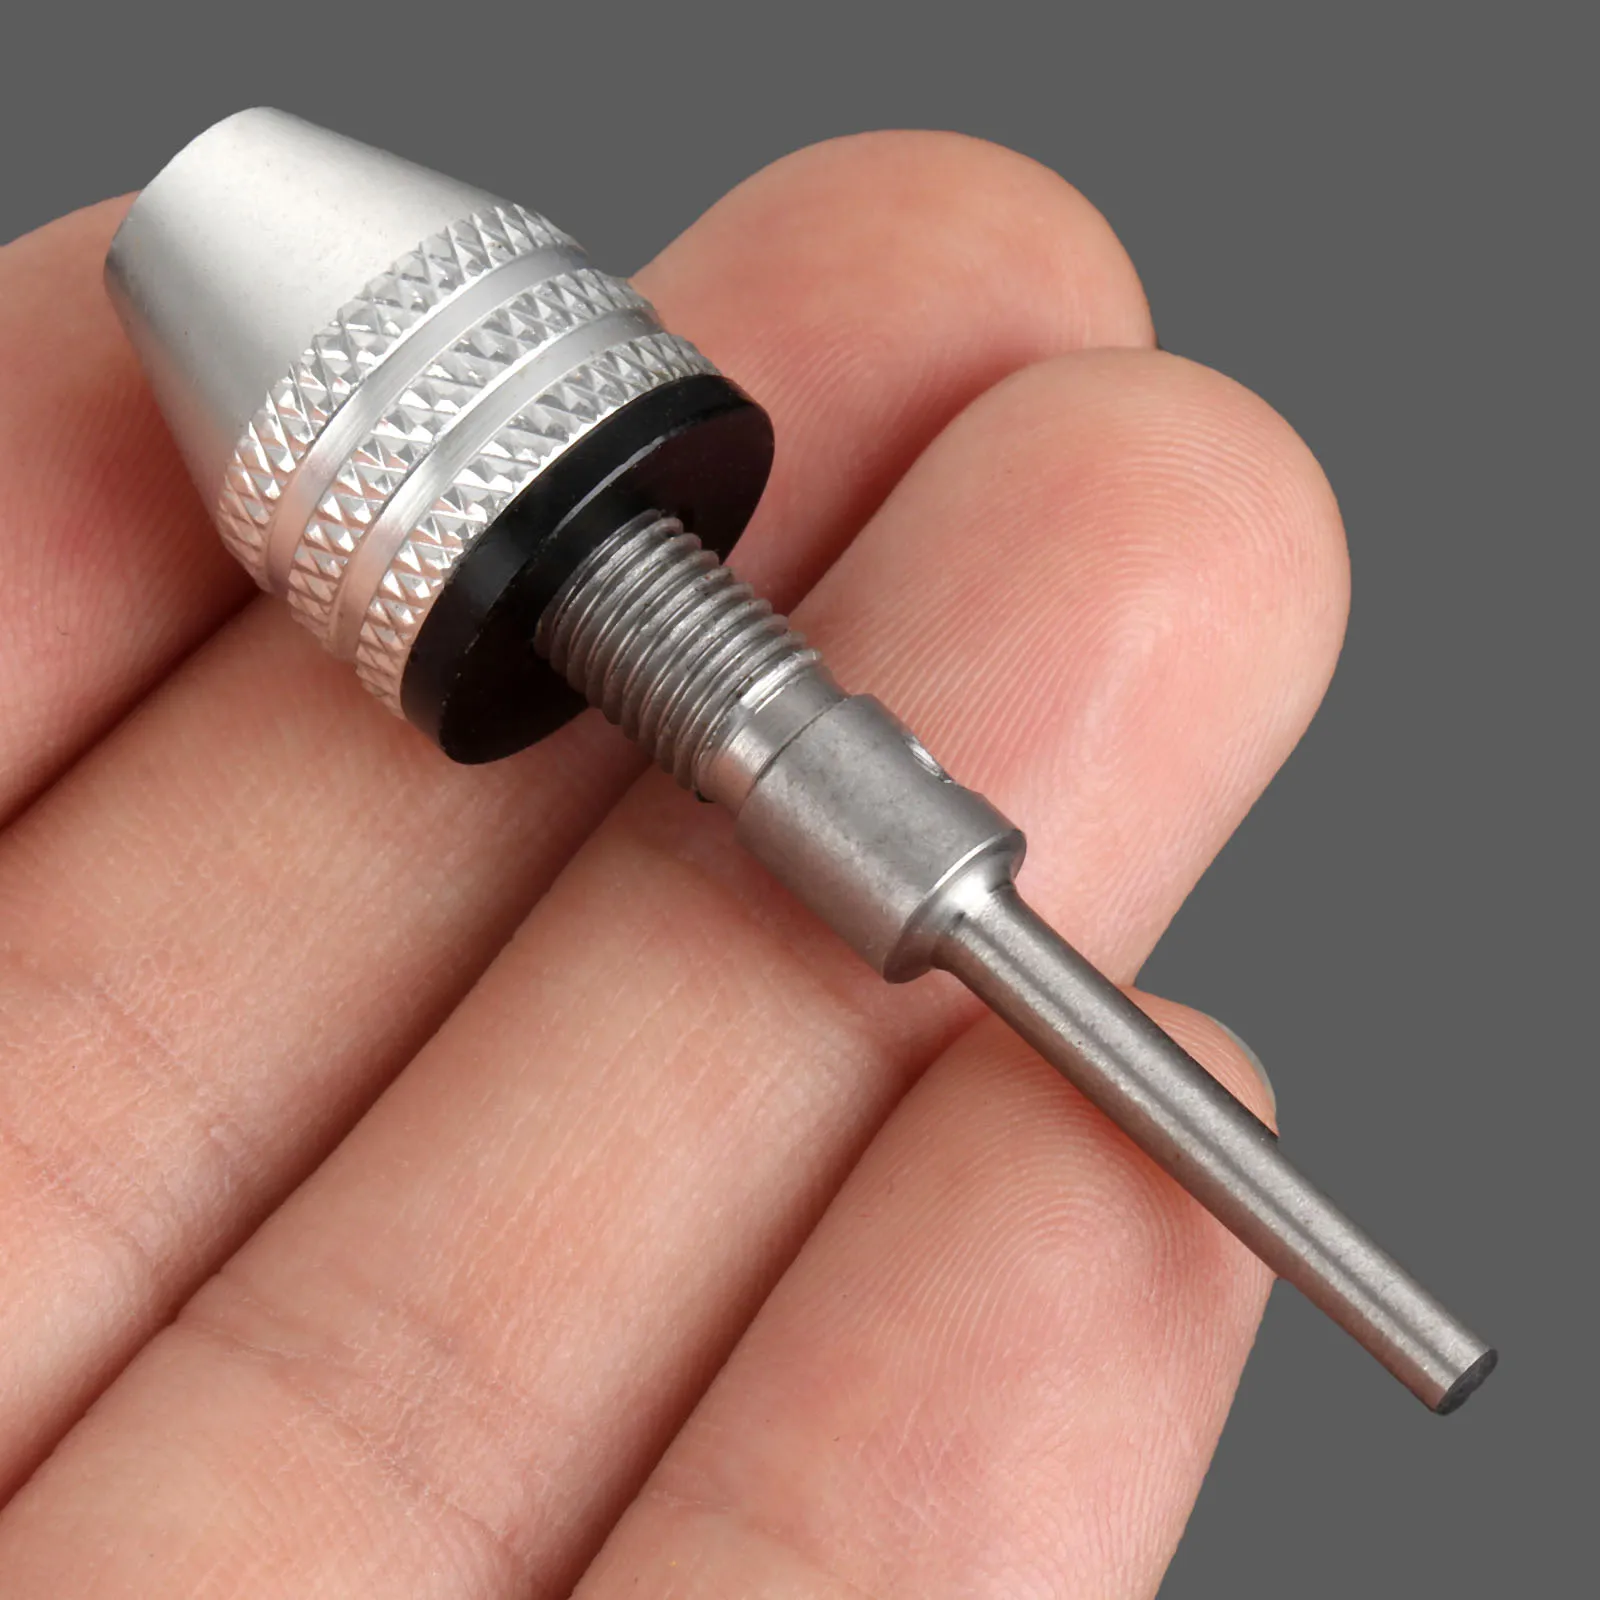 3mm Shank Mini Drill Chuck Adapter Converter For Power Impact Driver Grinding Engraving Machine Conversion Drill Chuck 0.3-3.4mm